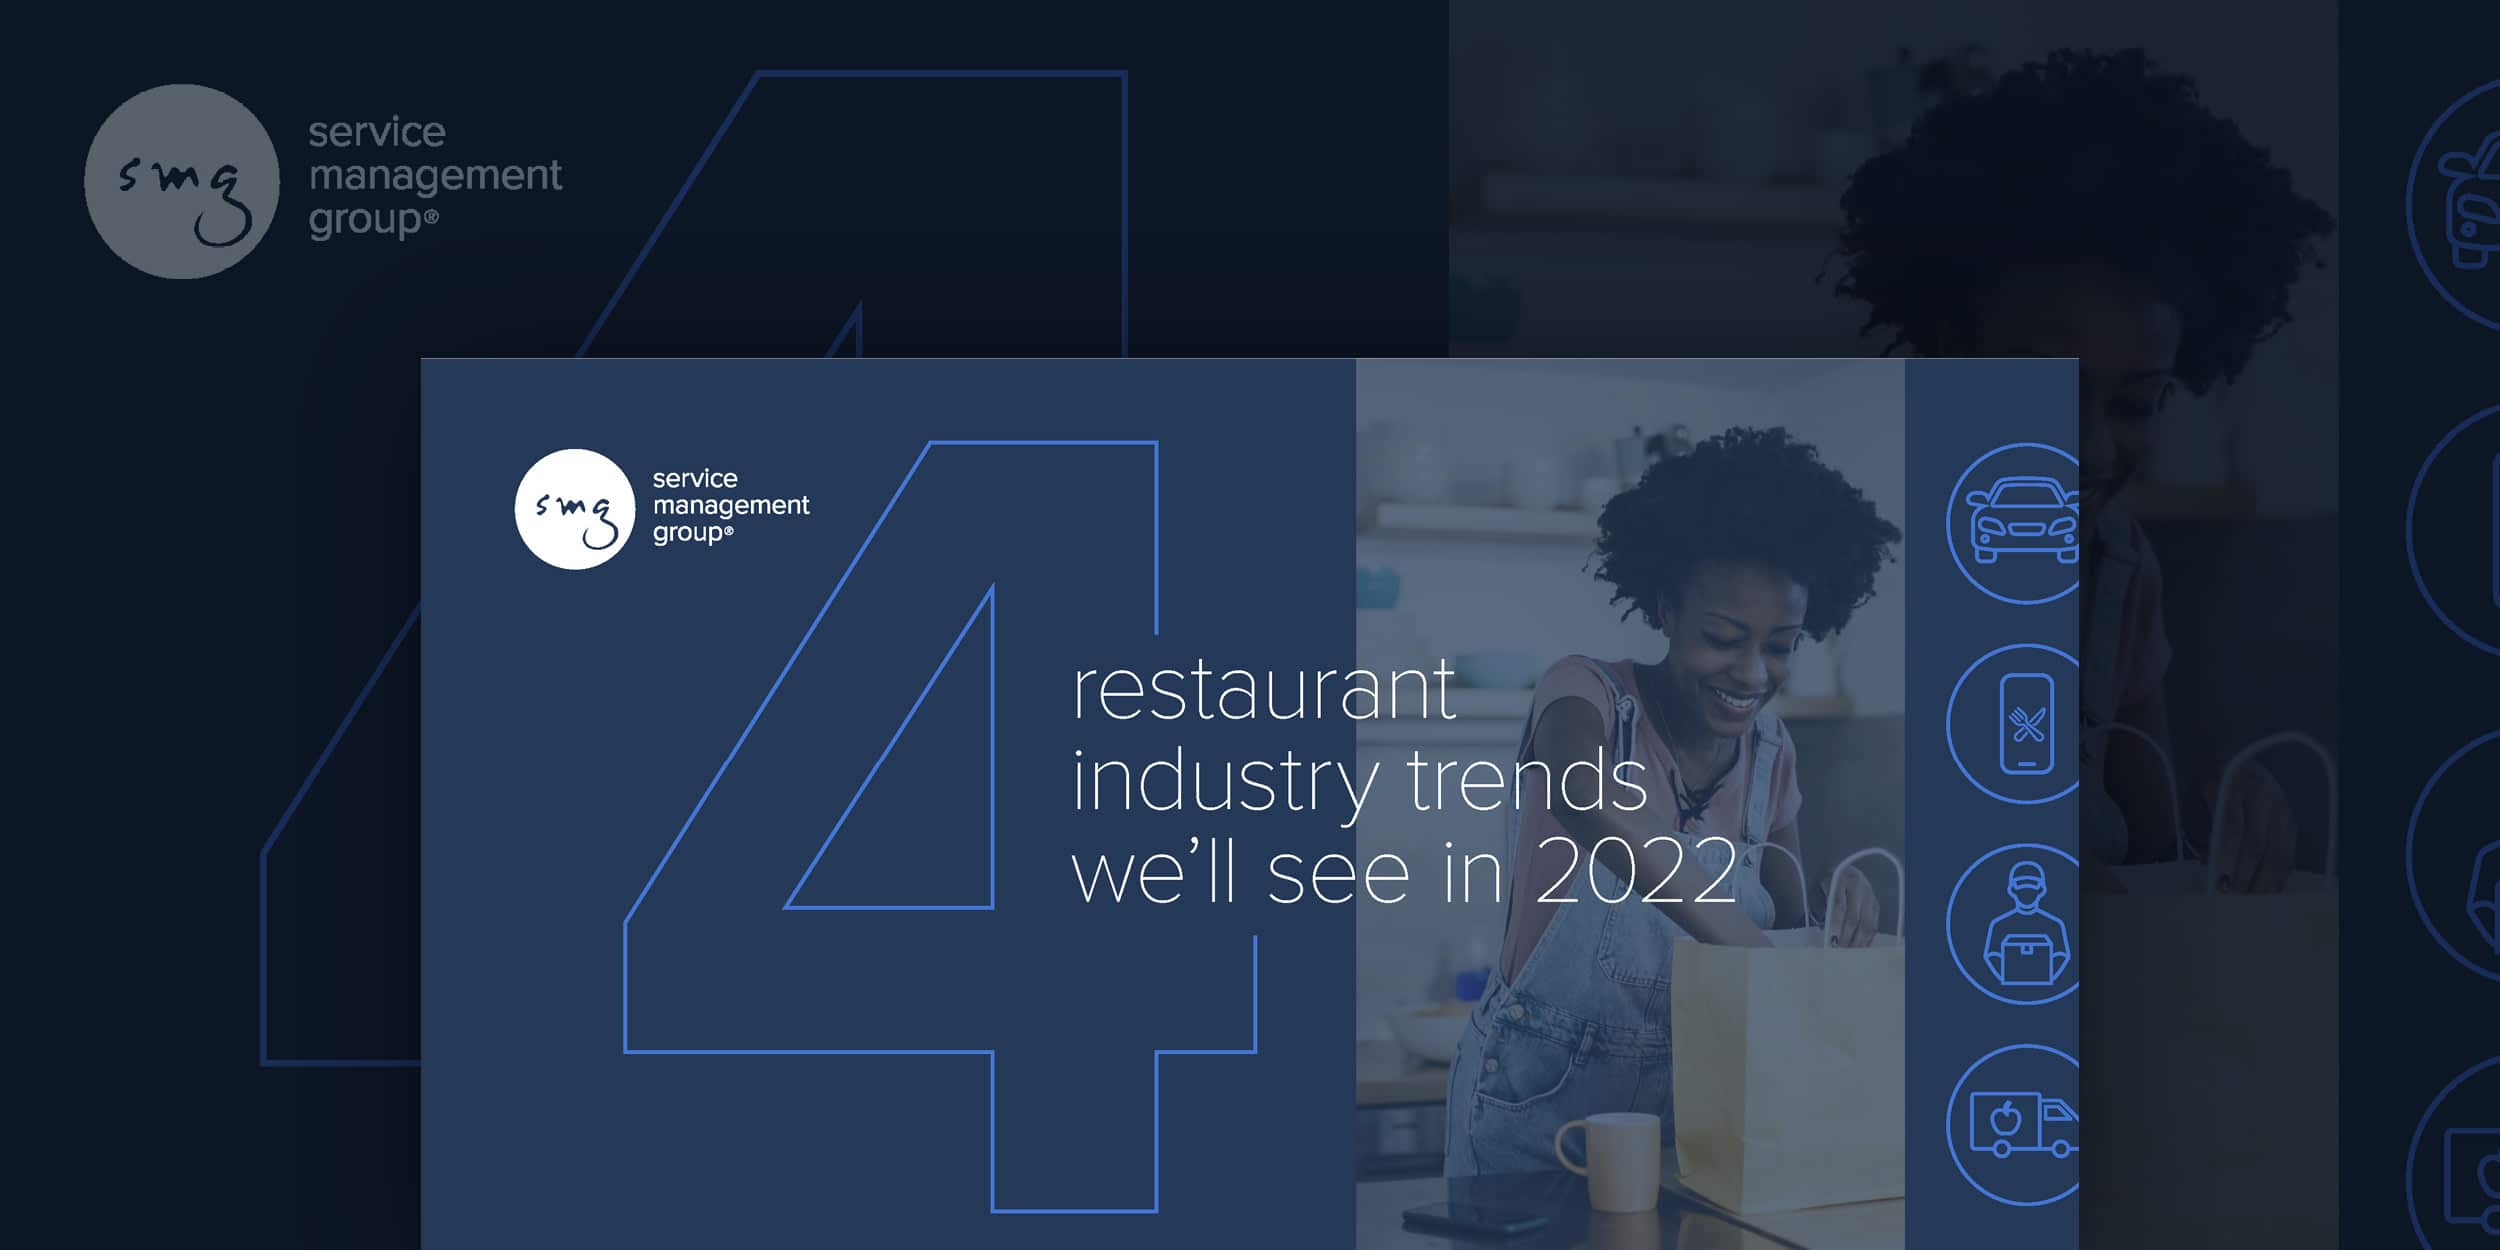 4 restaurant industry trends we’ll see in 2022